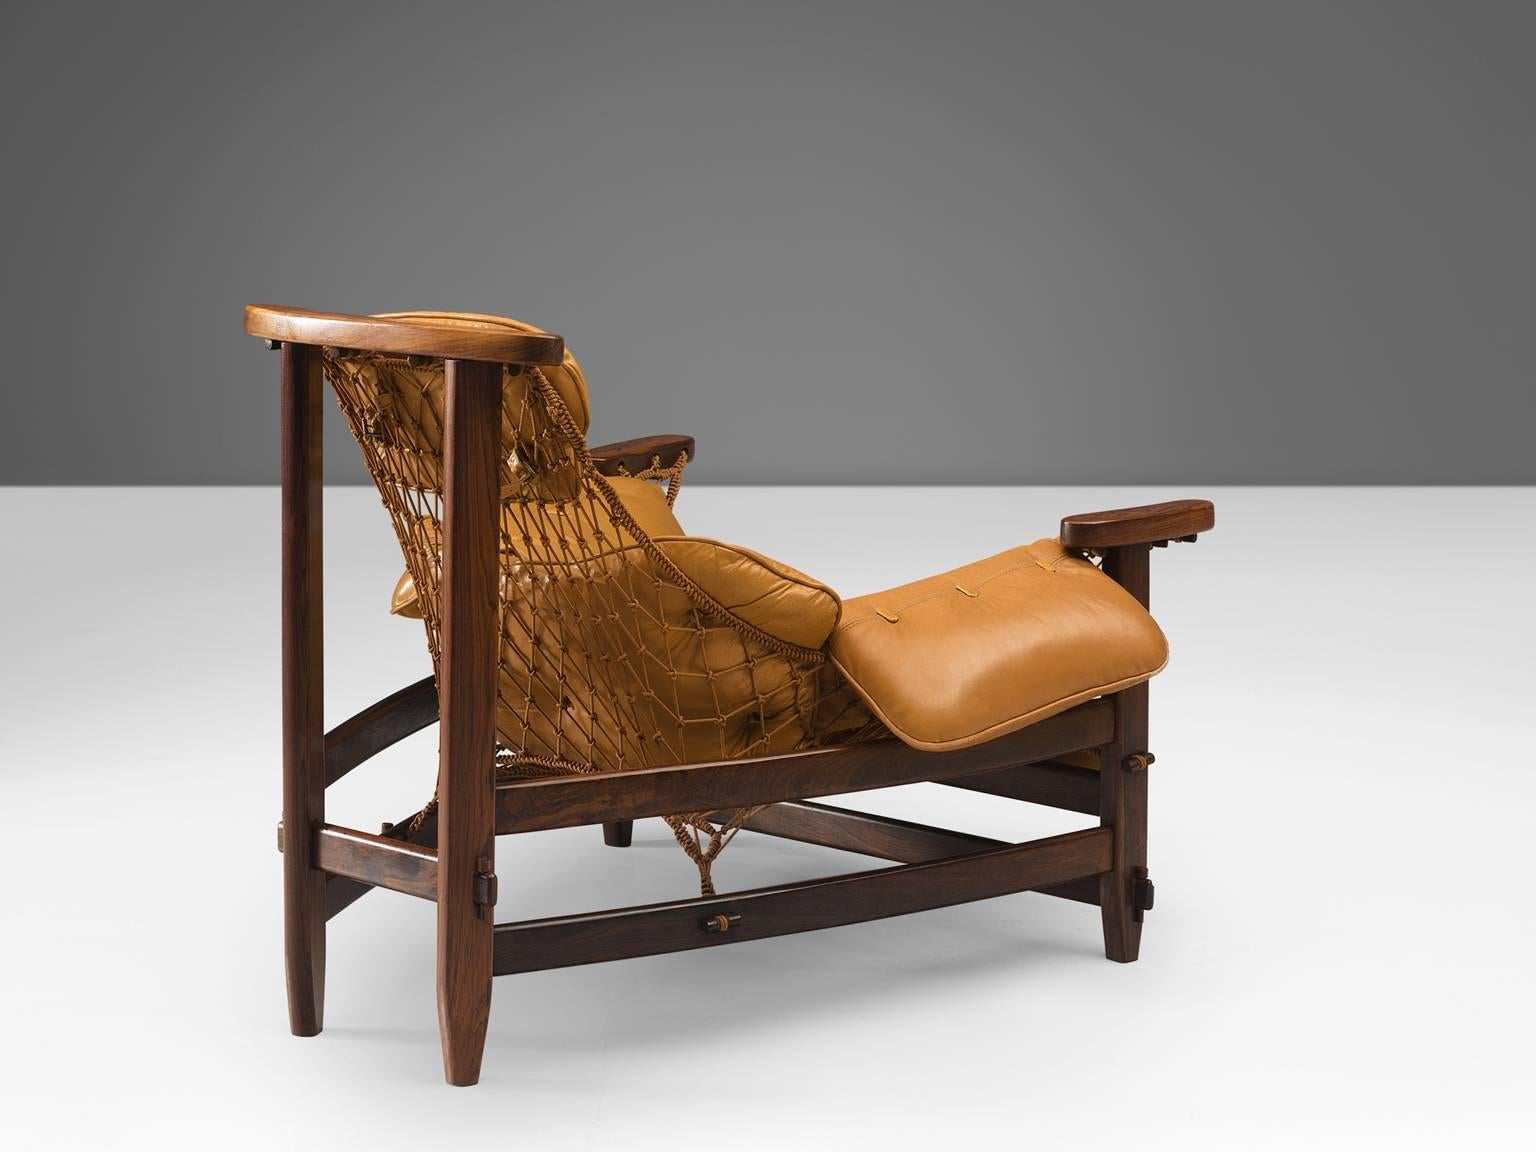 Jean Gillon, 'Jangada' armchair and ottoman, rosewood, nylon rope, leather, Brazil, 1968.

This robust and hefty armchair is designed by Jean Gillon. The originality of this Jangada comes from the concept of the body being captured by the piece of